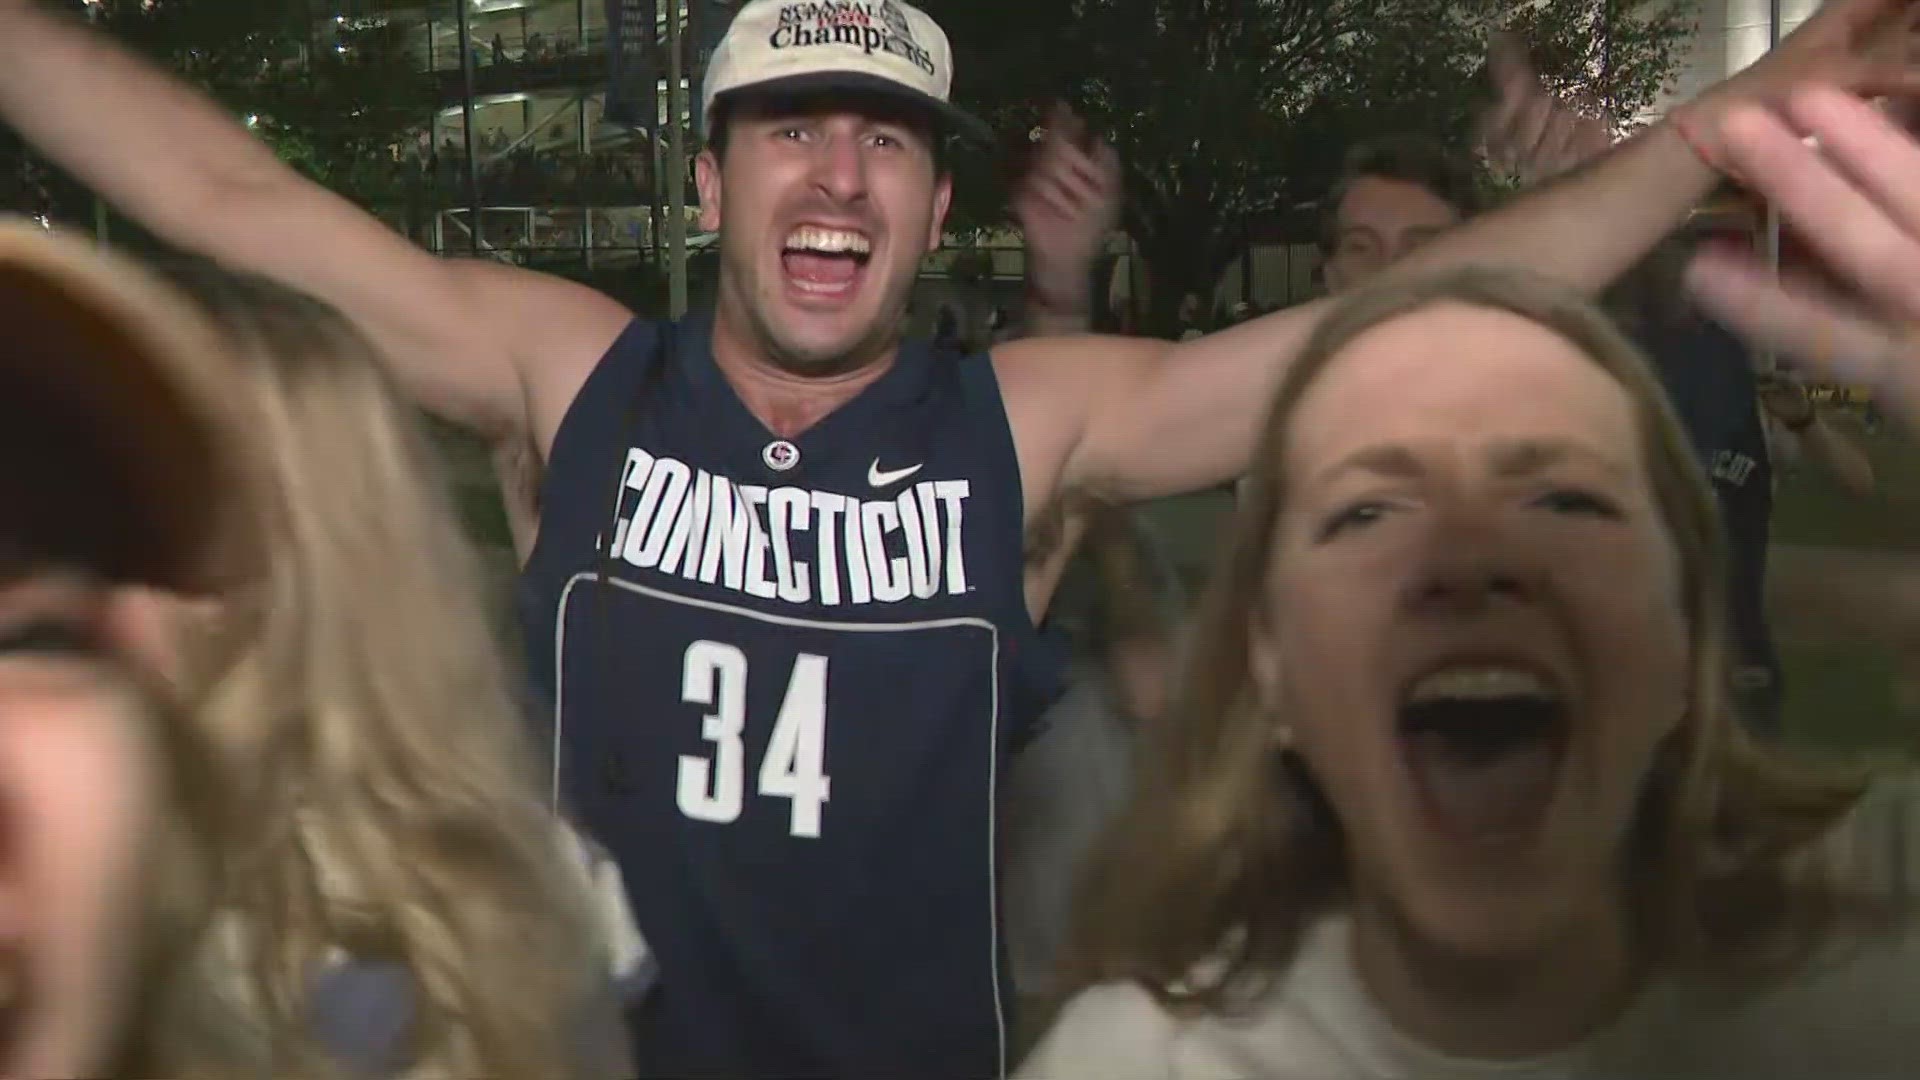 The UConn Huskies dominated the game from beginning to end to claim another national title.